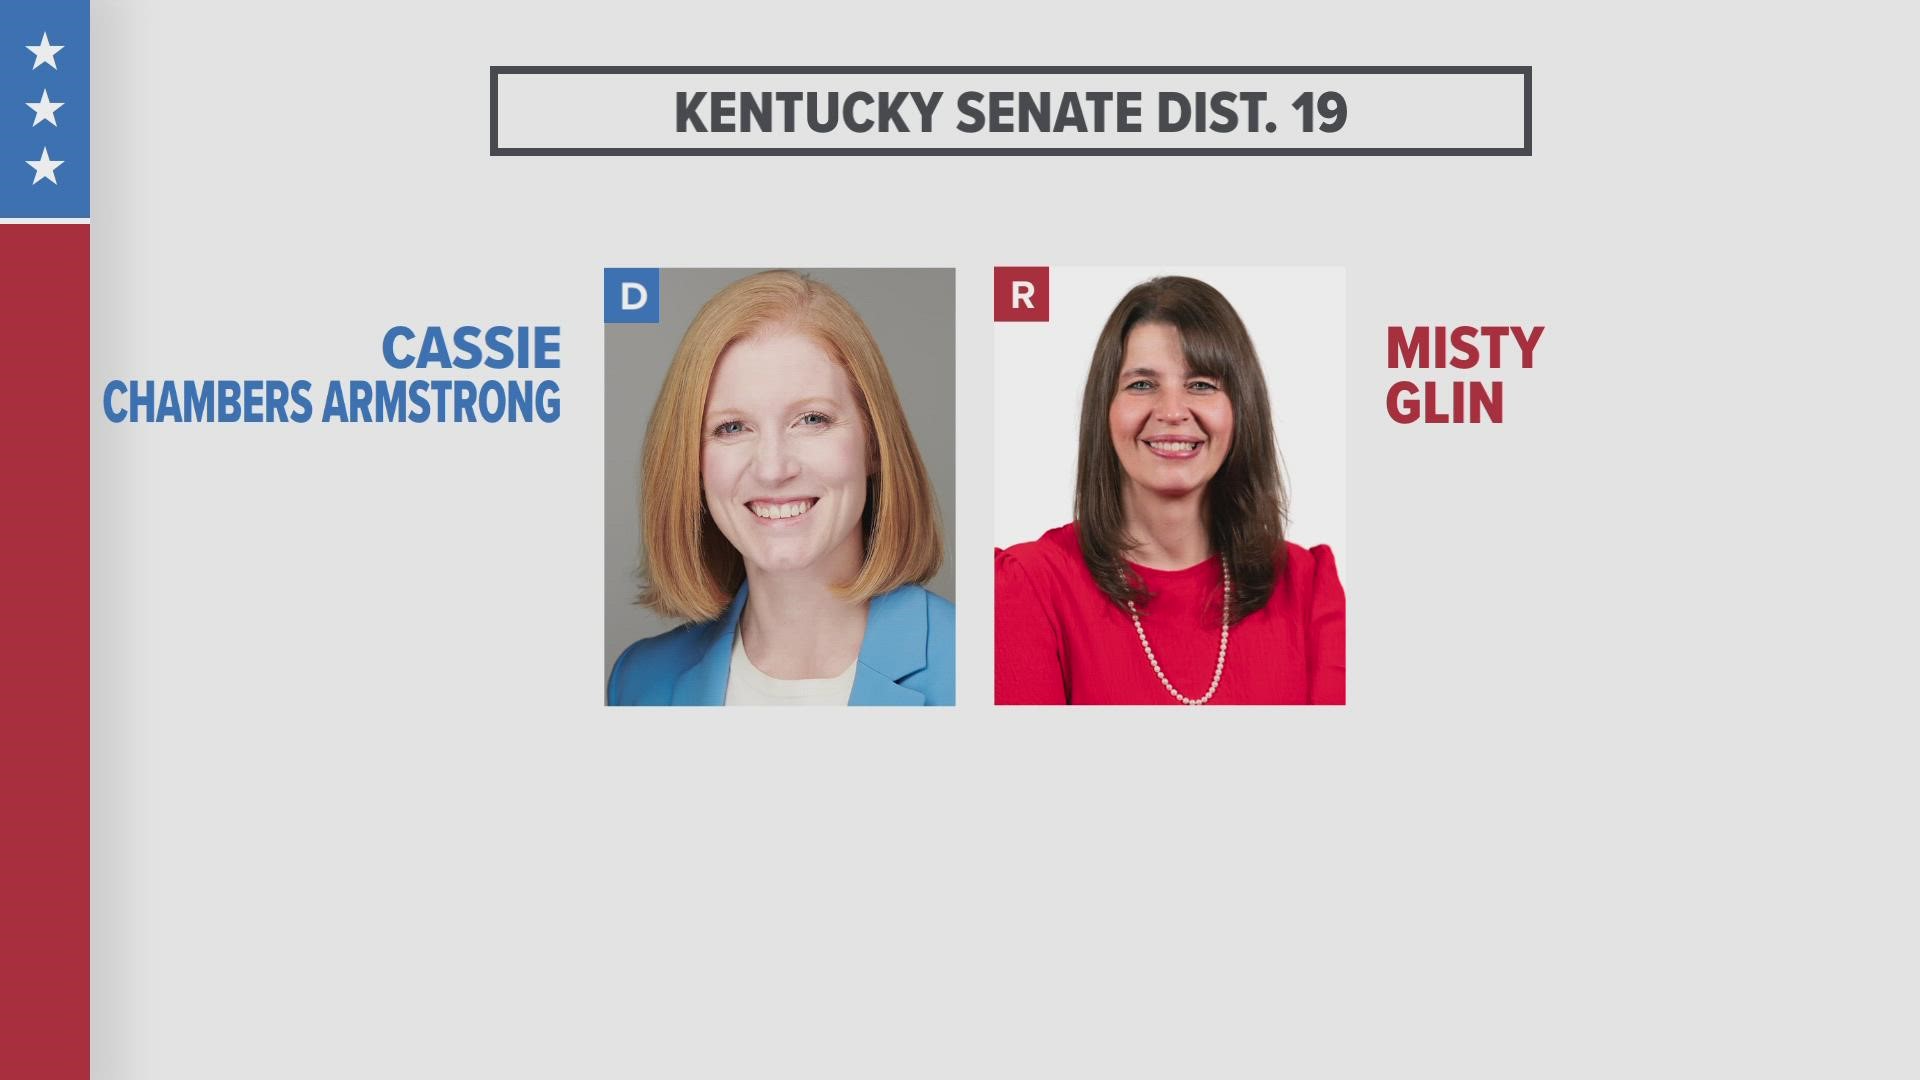 The Jefferson County Republican Party announced Misty Glin as their candidate, and the Louisville Democratic Party nominated Councilwoman Cassie Chambers Armstrong.